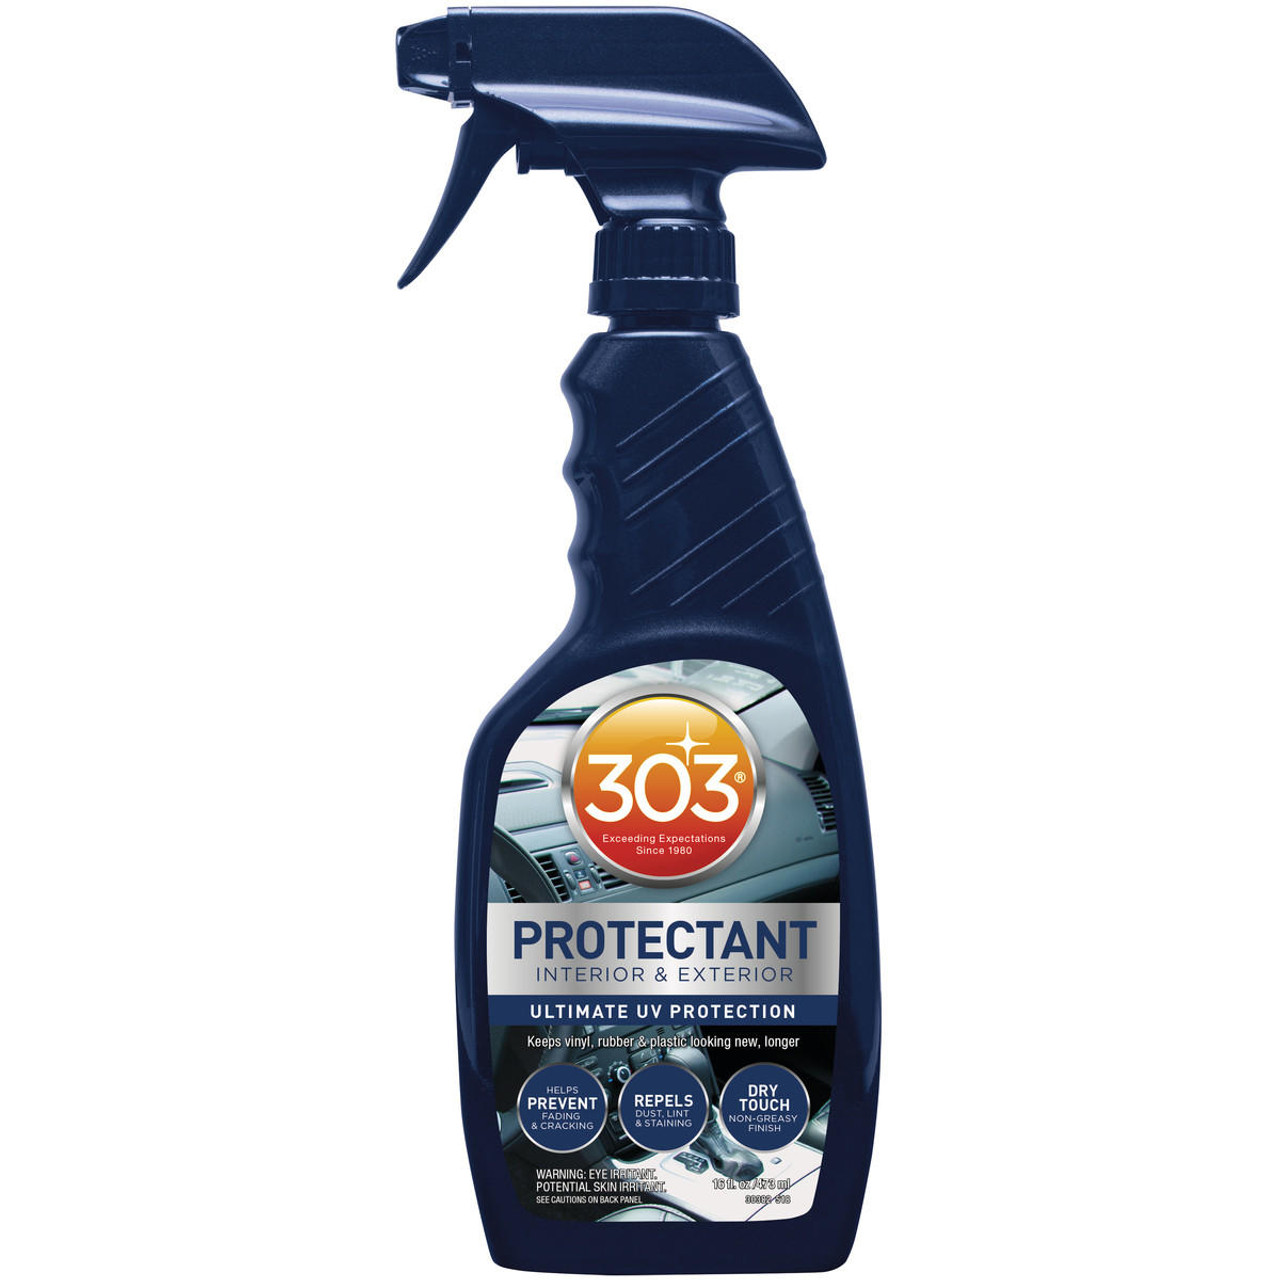 MISSION Boat Gear Clean & Protect :: Glass Cleaner